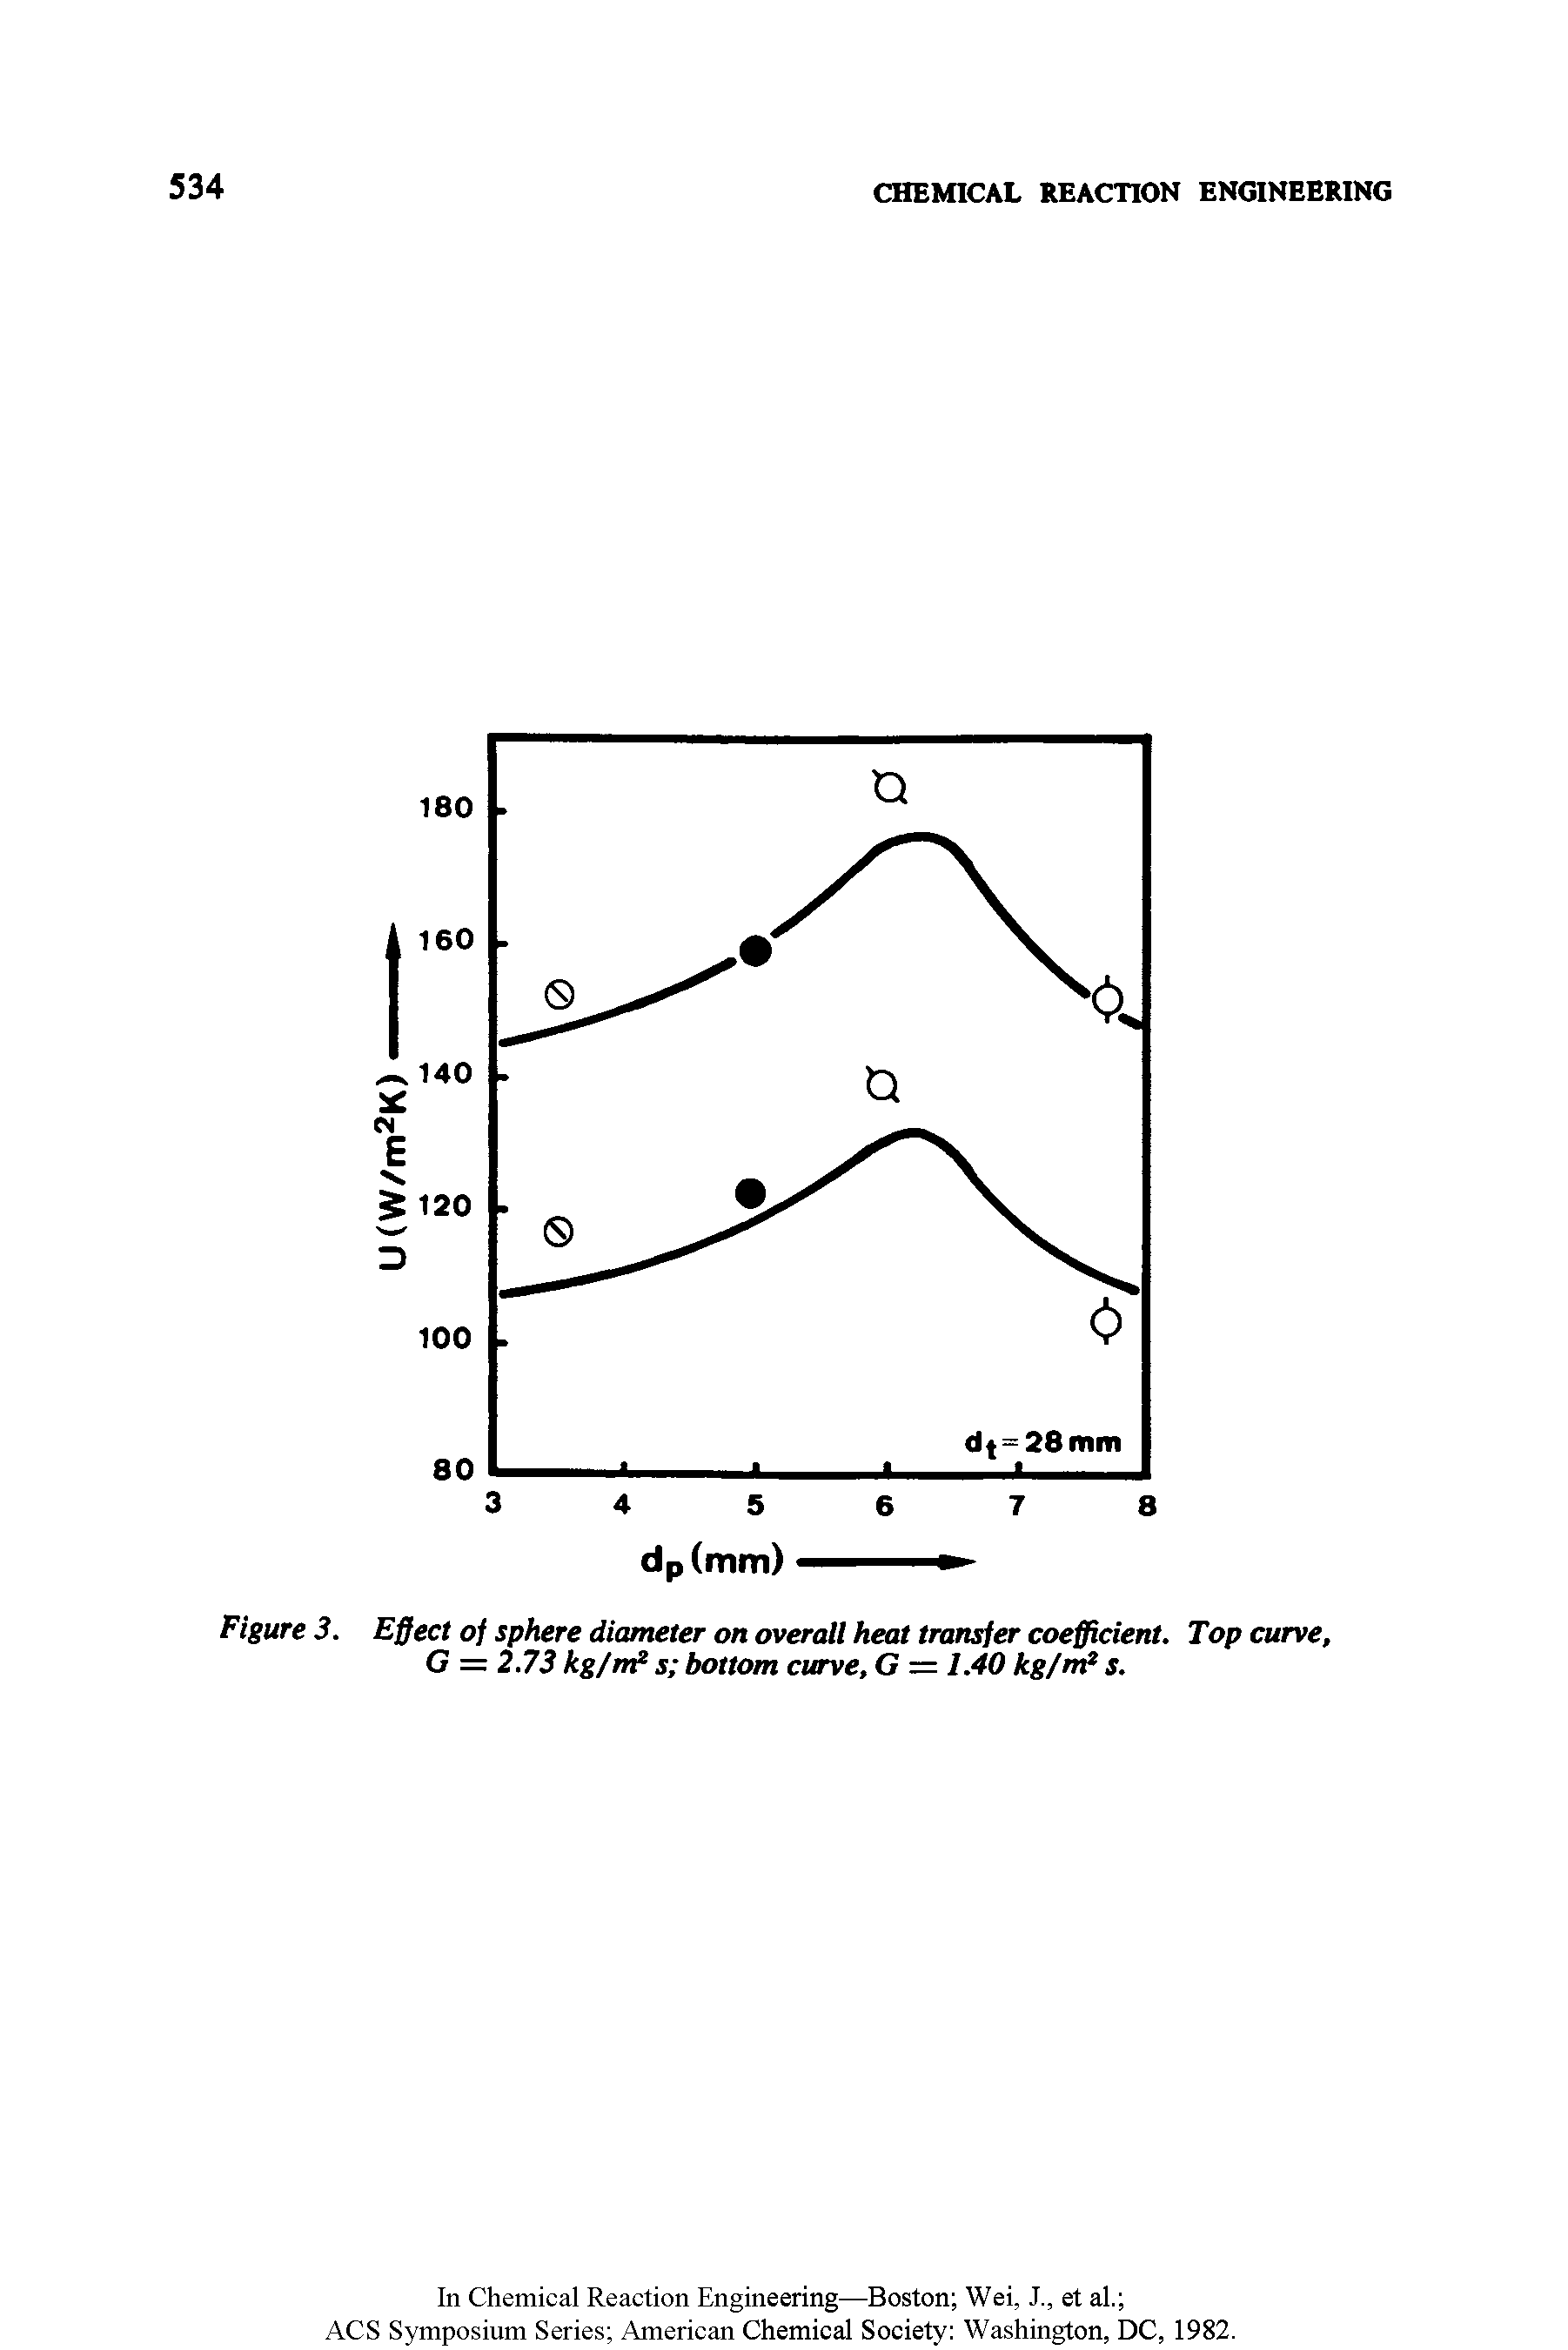 Figure 3. Effect of sphere diameter on overall heal transfer coefficient. Top curve, G = 2.73 kg/rn2 s bottom curve, G = 1.40 kg/m s.